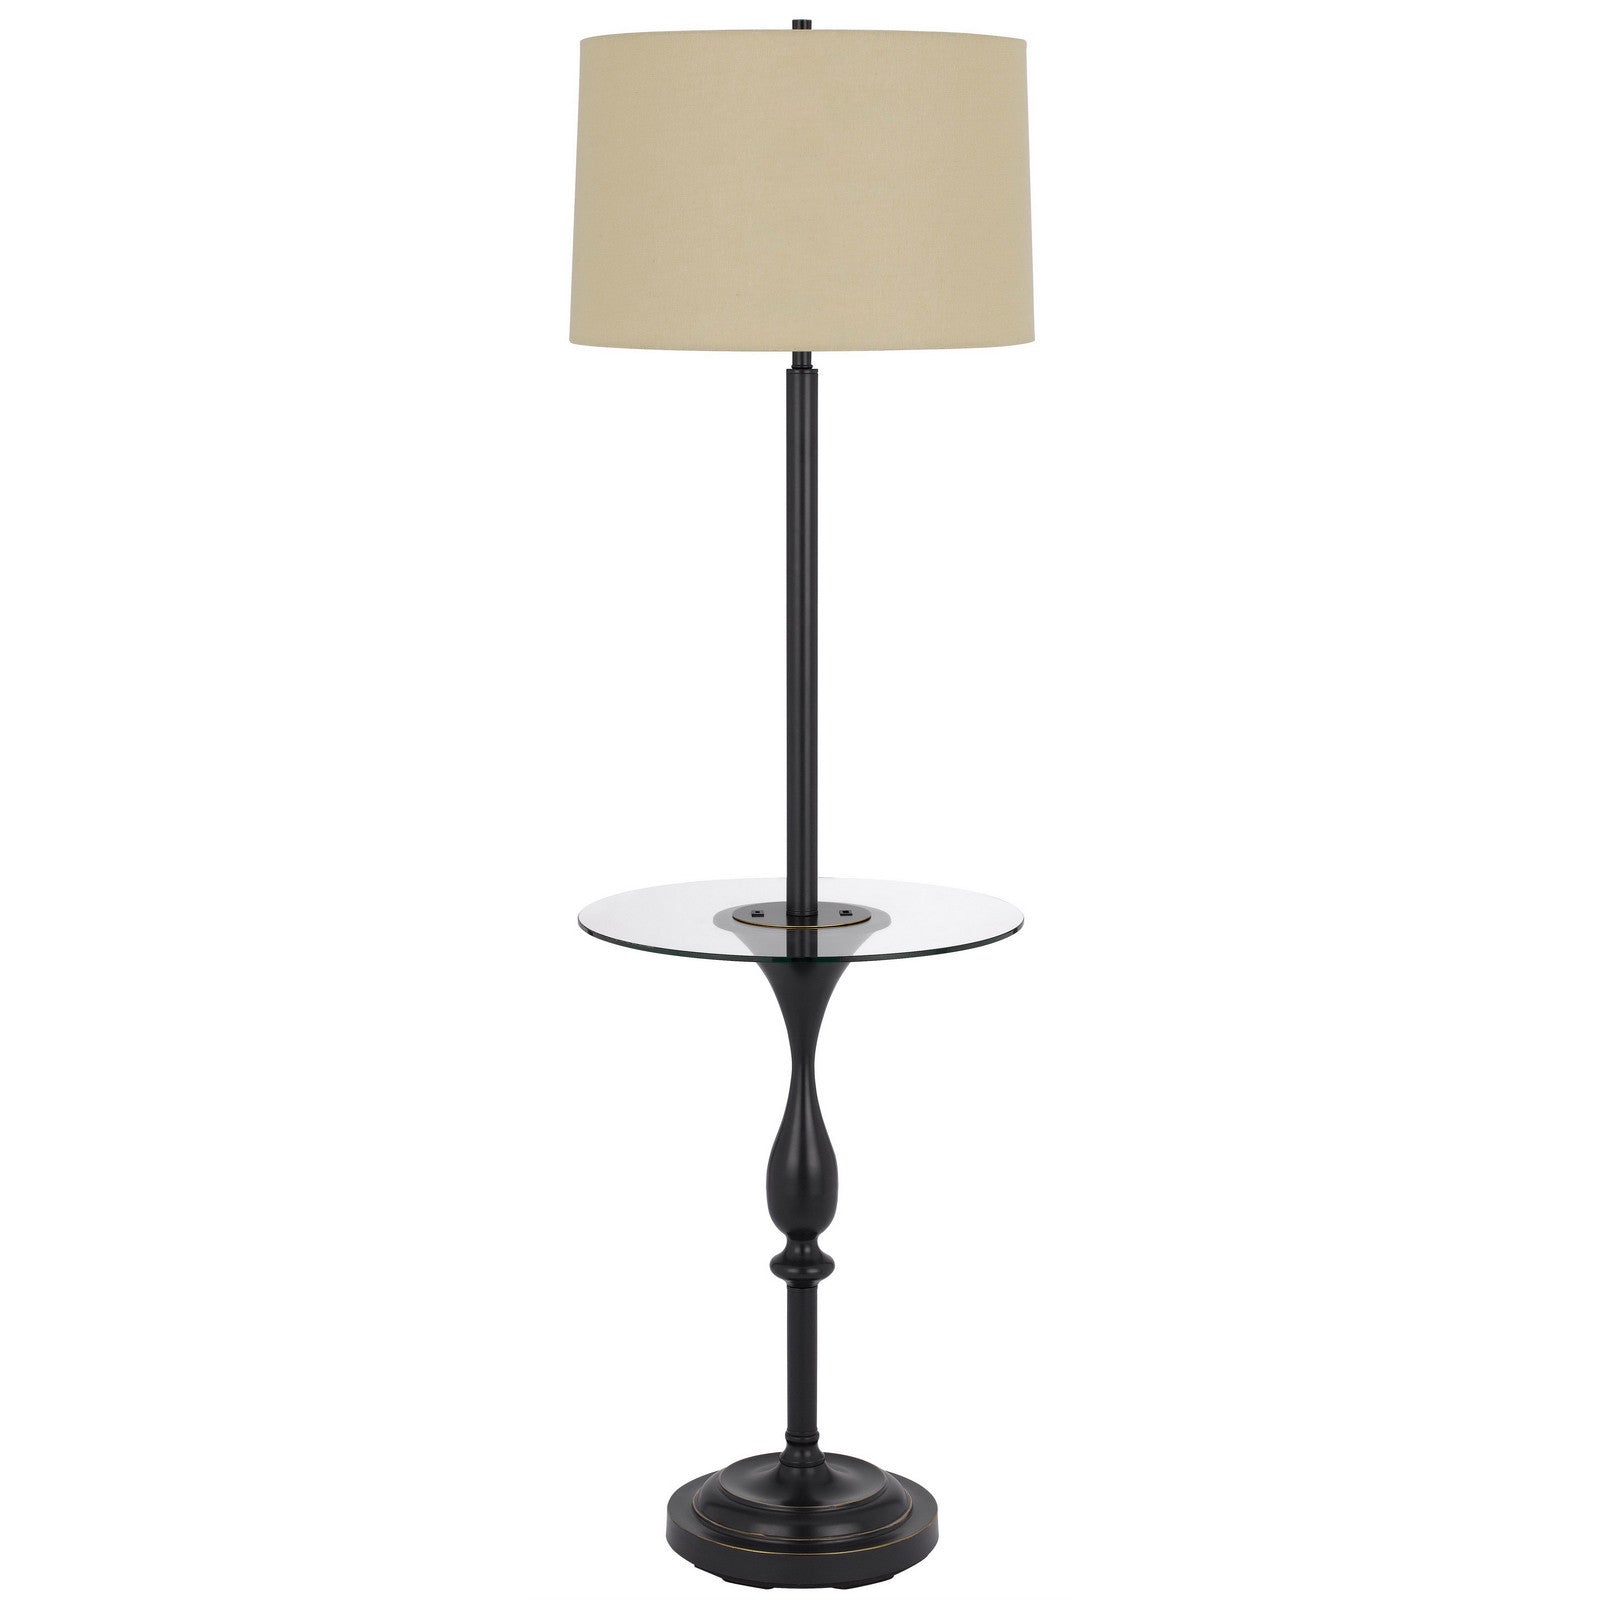 61" Bronze Tray Table Floor Lamp With Tan Transparent Glass Square Shade